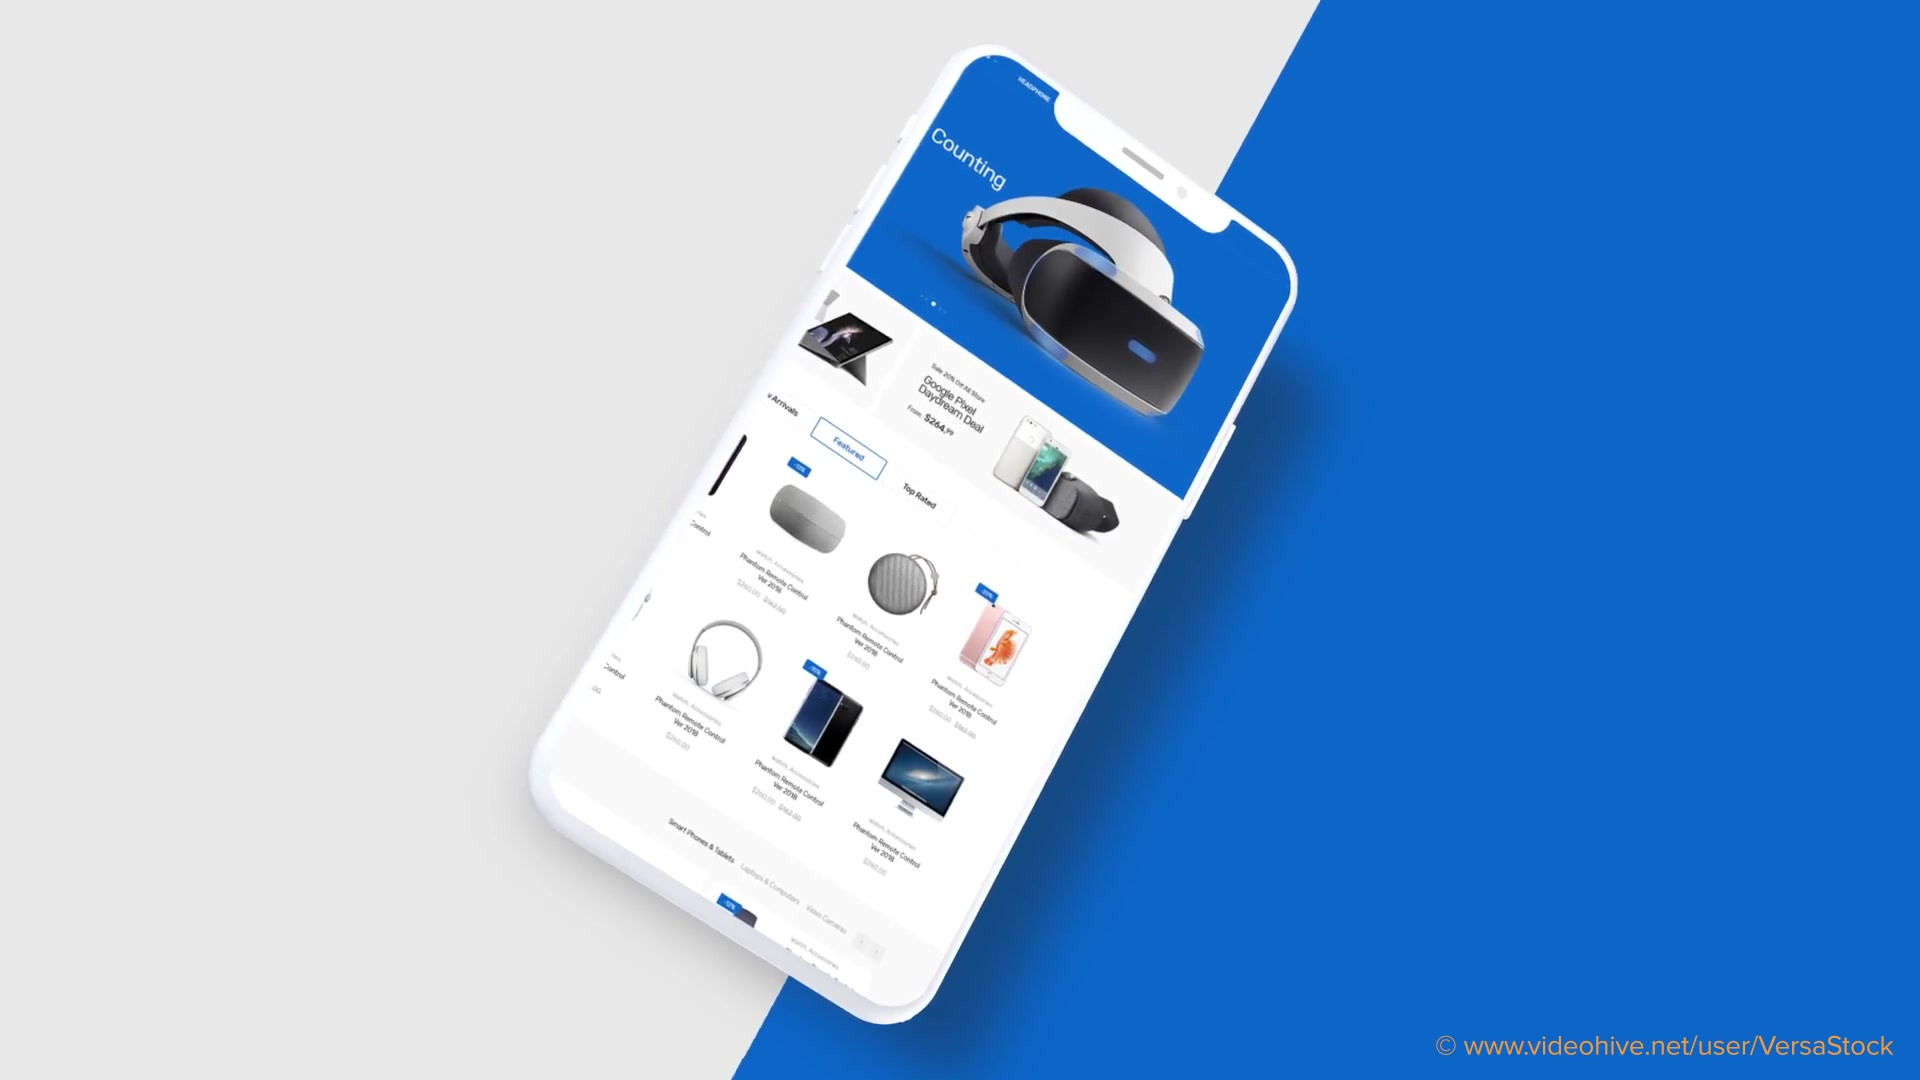 Animated Devices Kit | UI UX Promo - Download Videohive 22967757